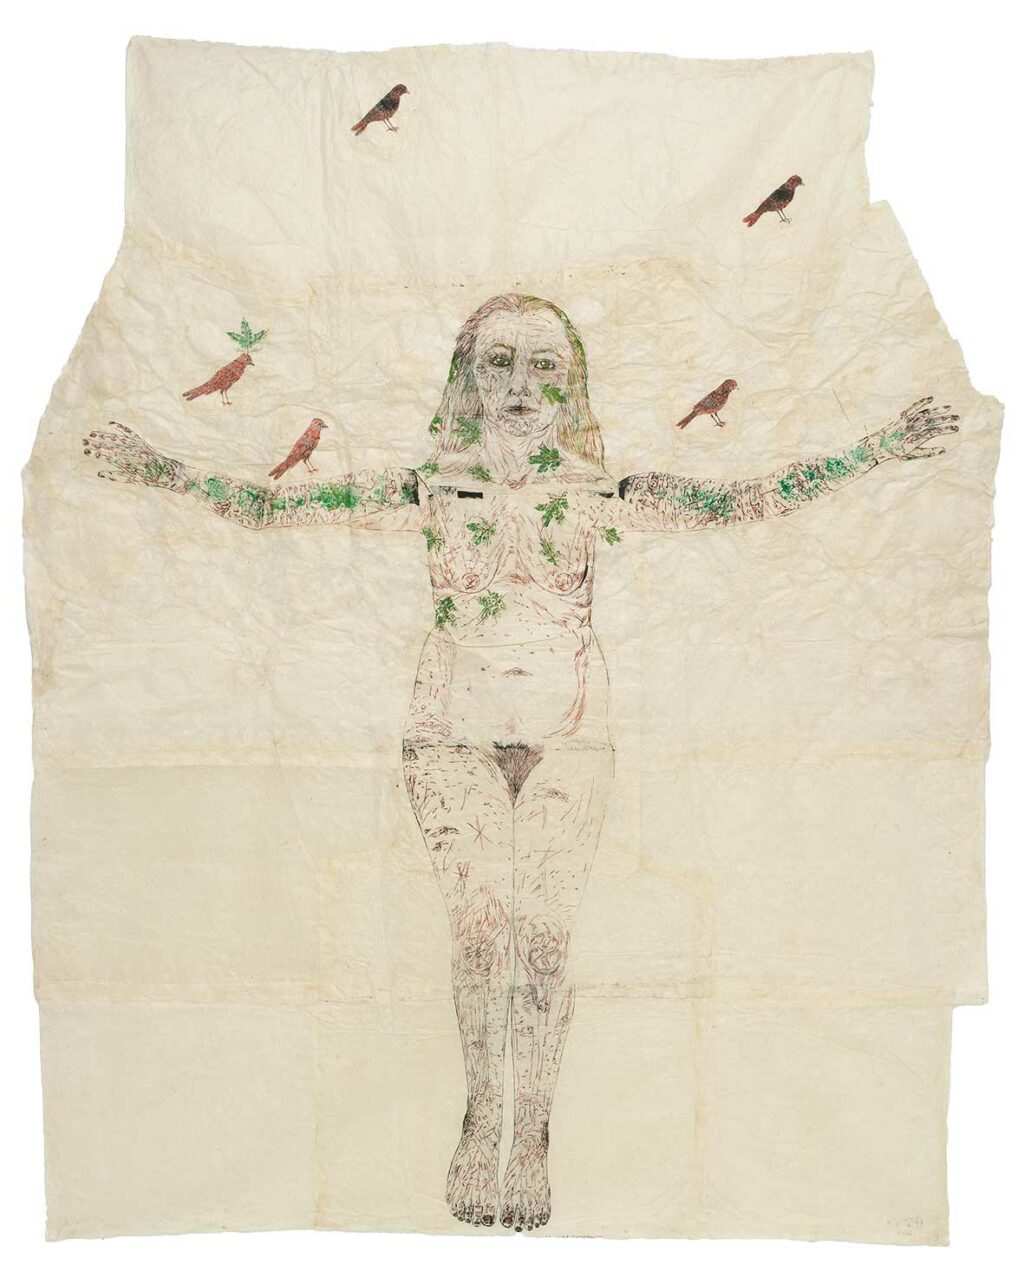 An ink drawing made on several sheets of cobweb paper, superimposed on each other. The subject is a naked woman's body, with skin resembling the bark of a tree and green leaves growing on it. Above the woman are five red birds.